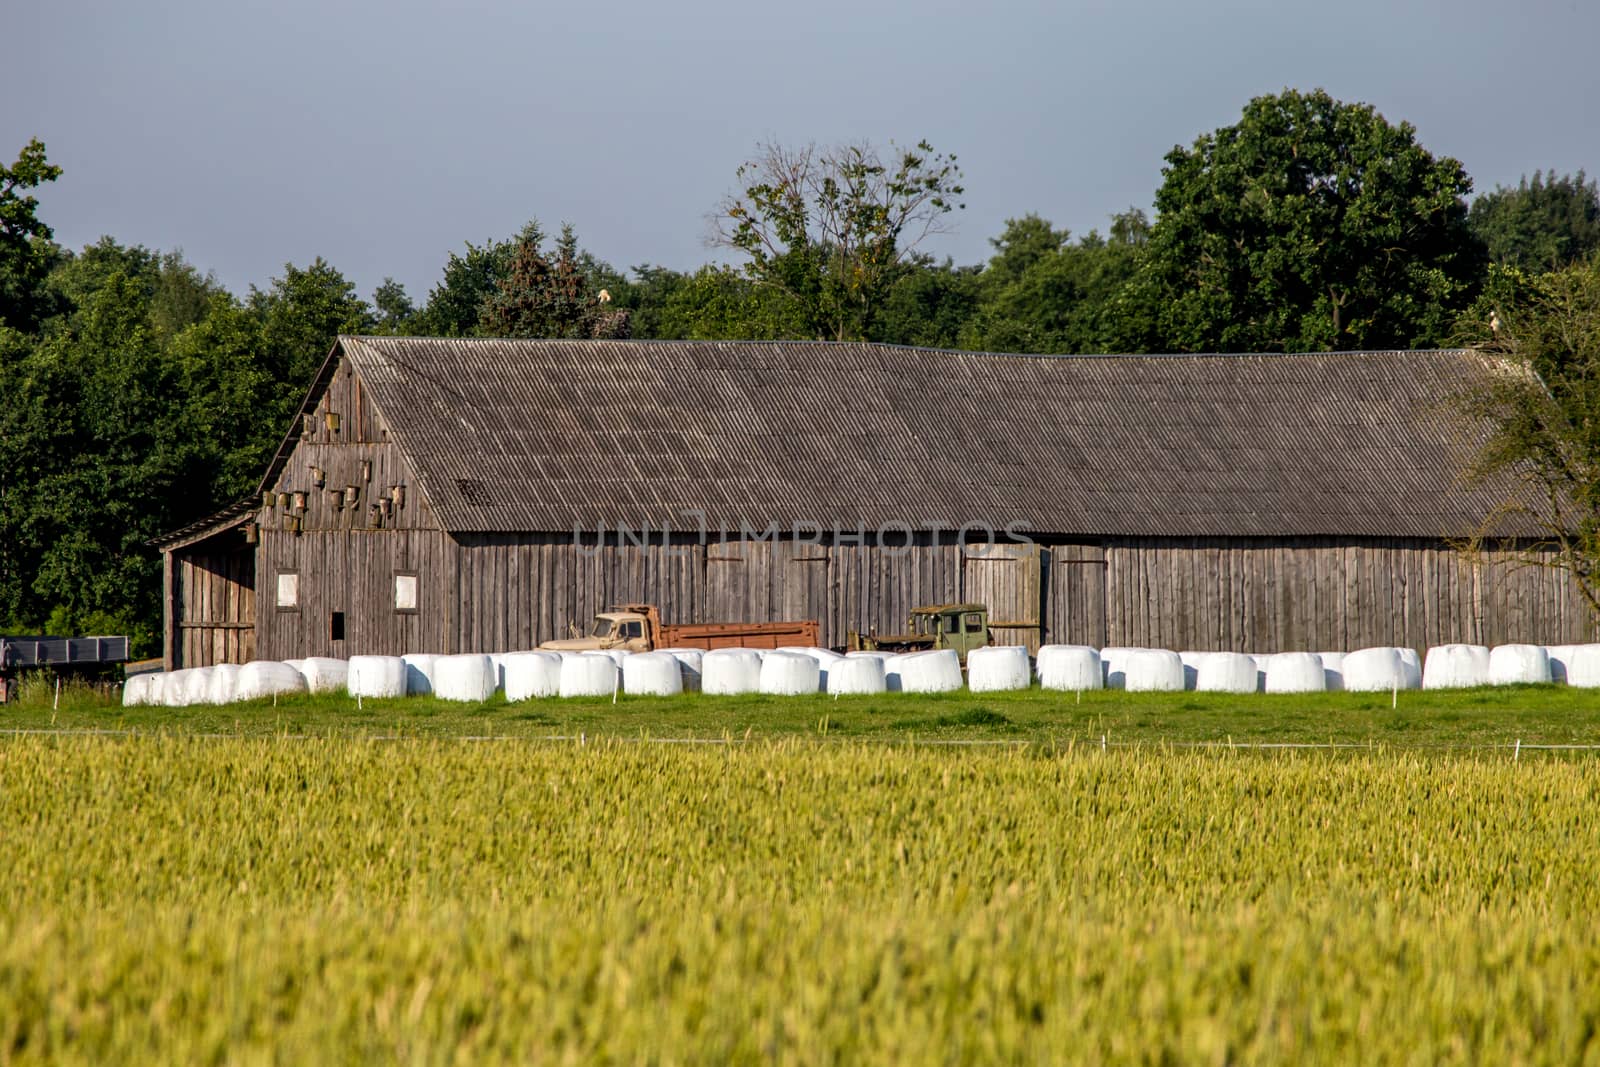 Hay bales on the green meadow at the barn. Hay bales on the field near the barn in Latvia. Summer landscape with cereal field, trees and barn. Barn at the edge of the field. Classic rural landscape in Latvia. 